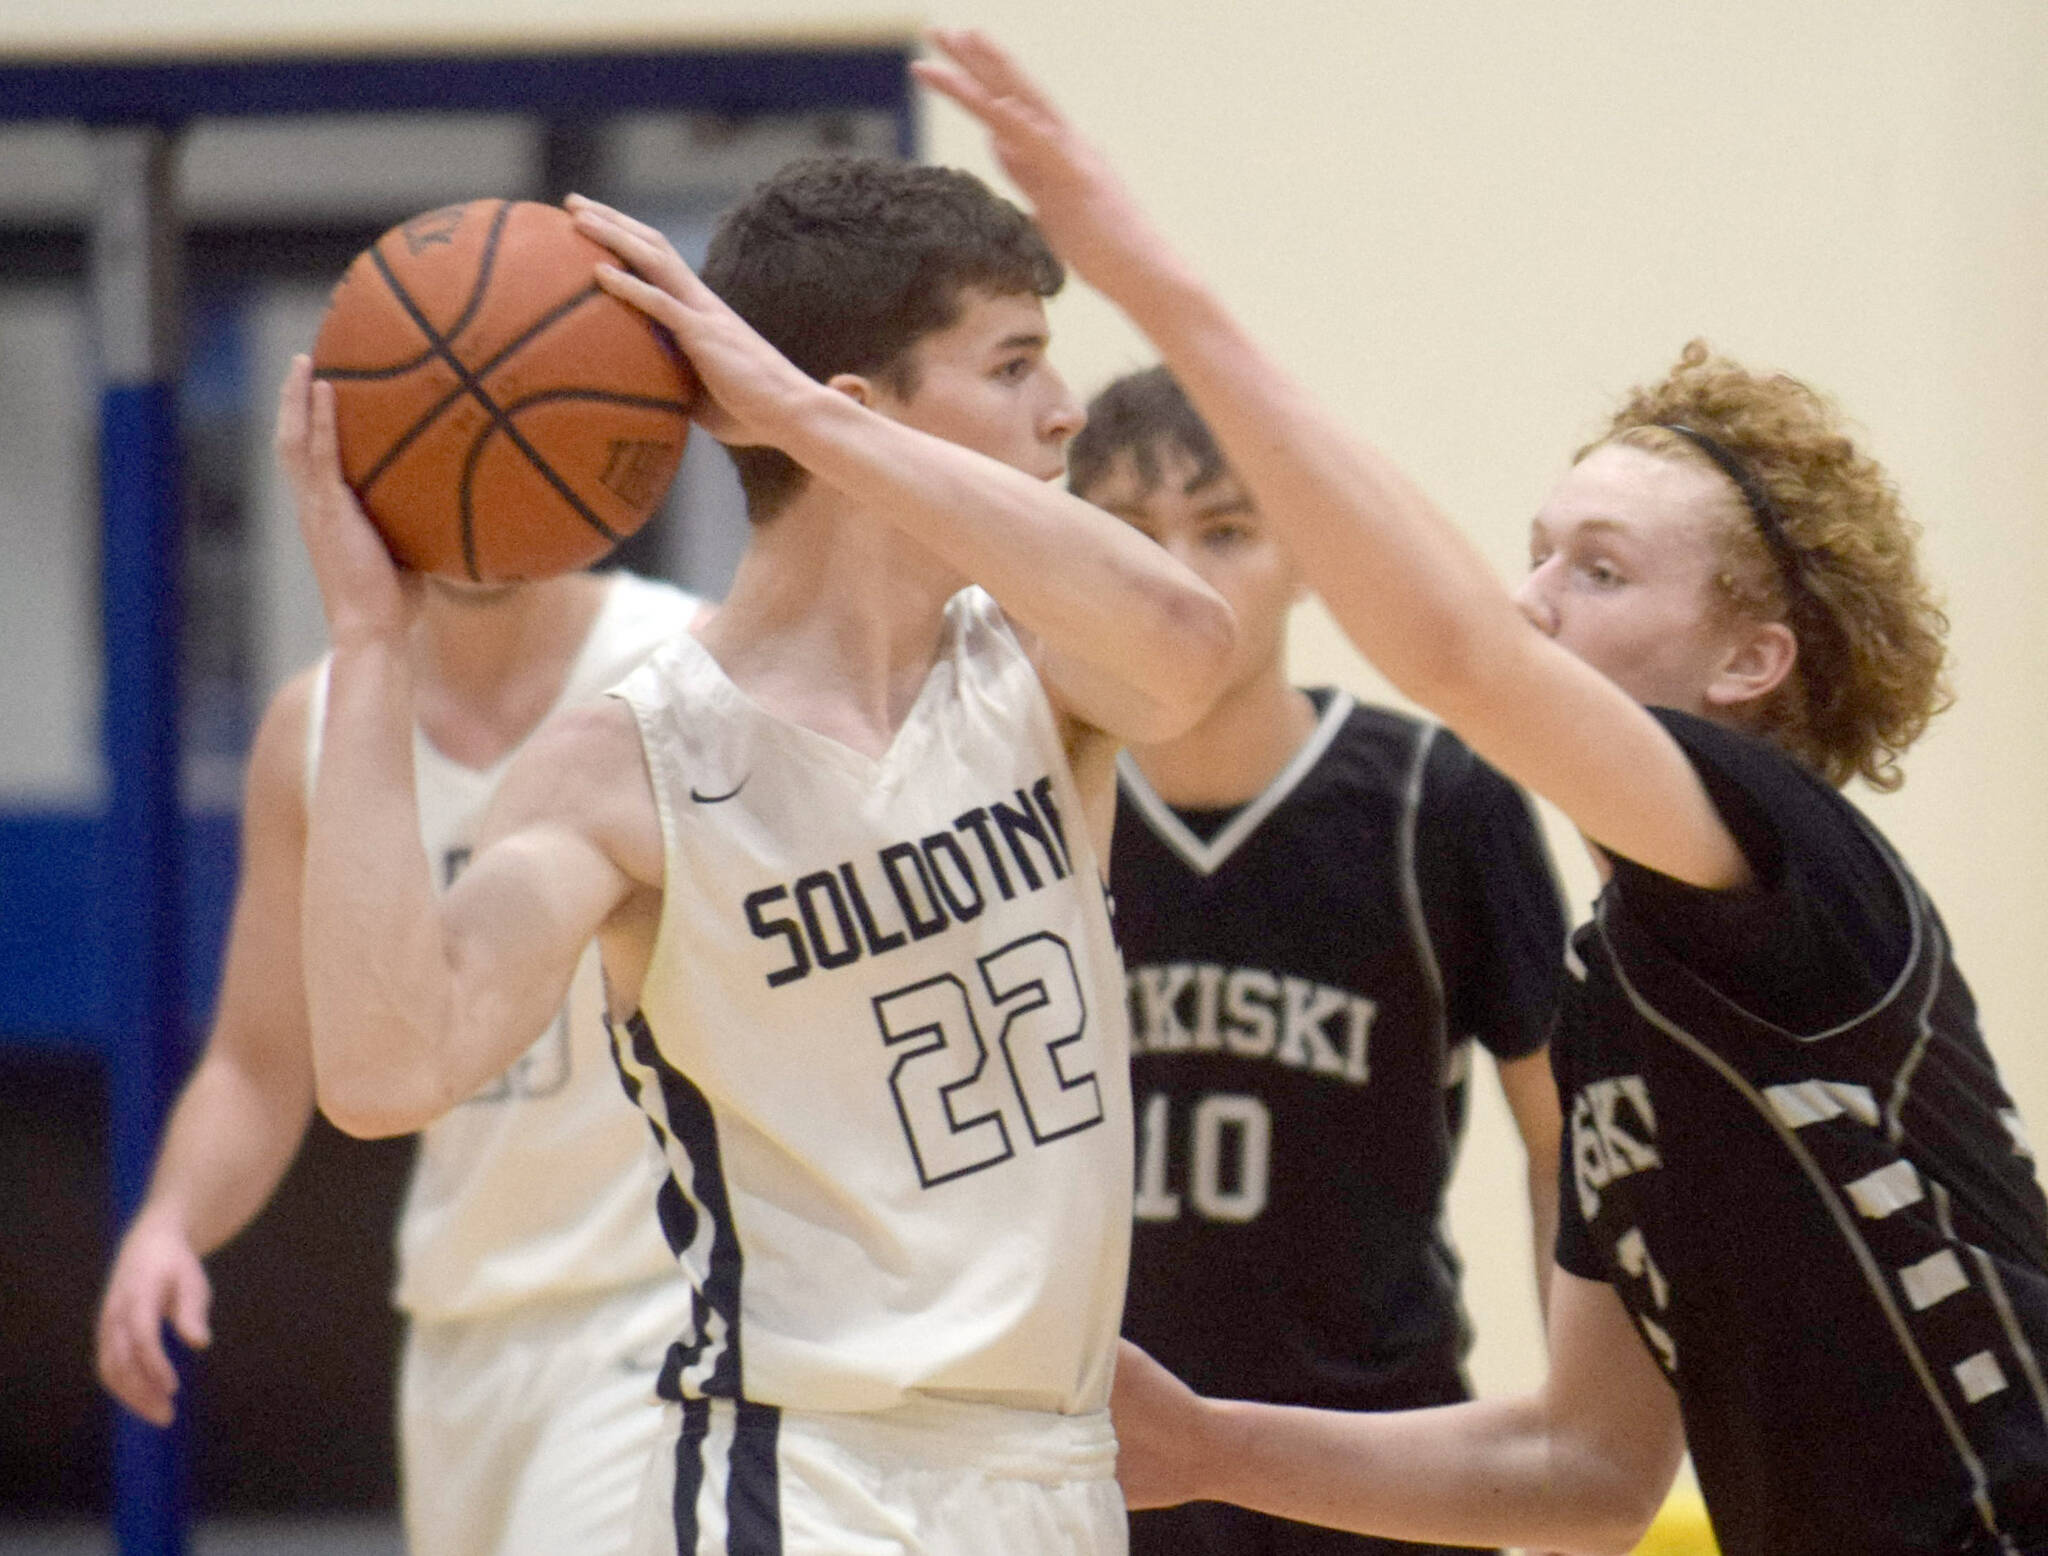 Soldotna’s Ethan Sewell handles pressure from Nikiski’s Brady Bostic on Tuesday, Feb. 8, 2022, at Soldotna High School in Soldotna, Alaska. (Photo by Camille Botello/Peninsula Clarion)